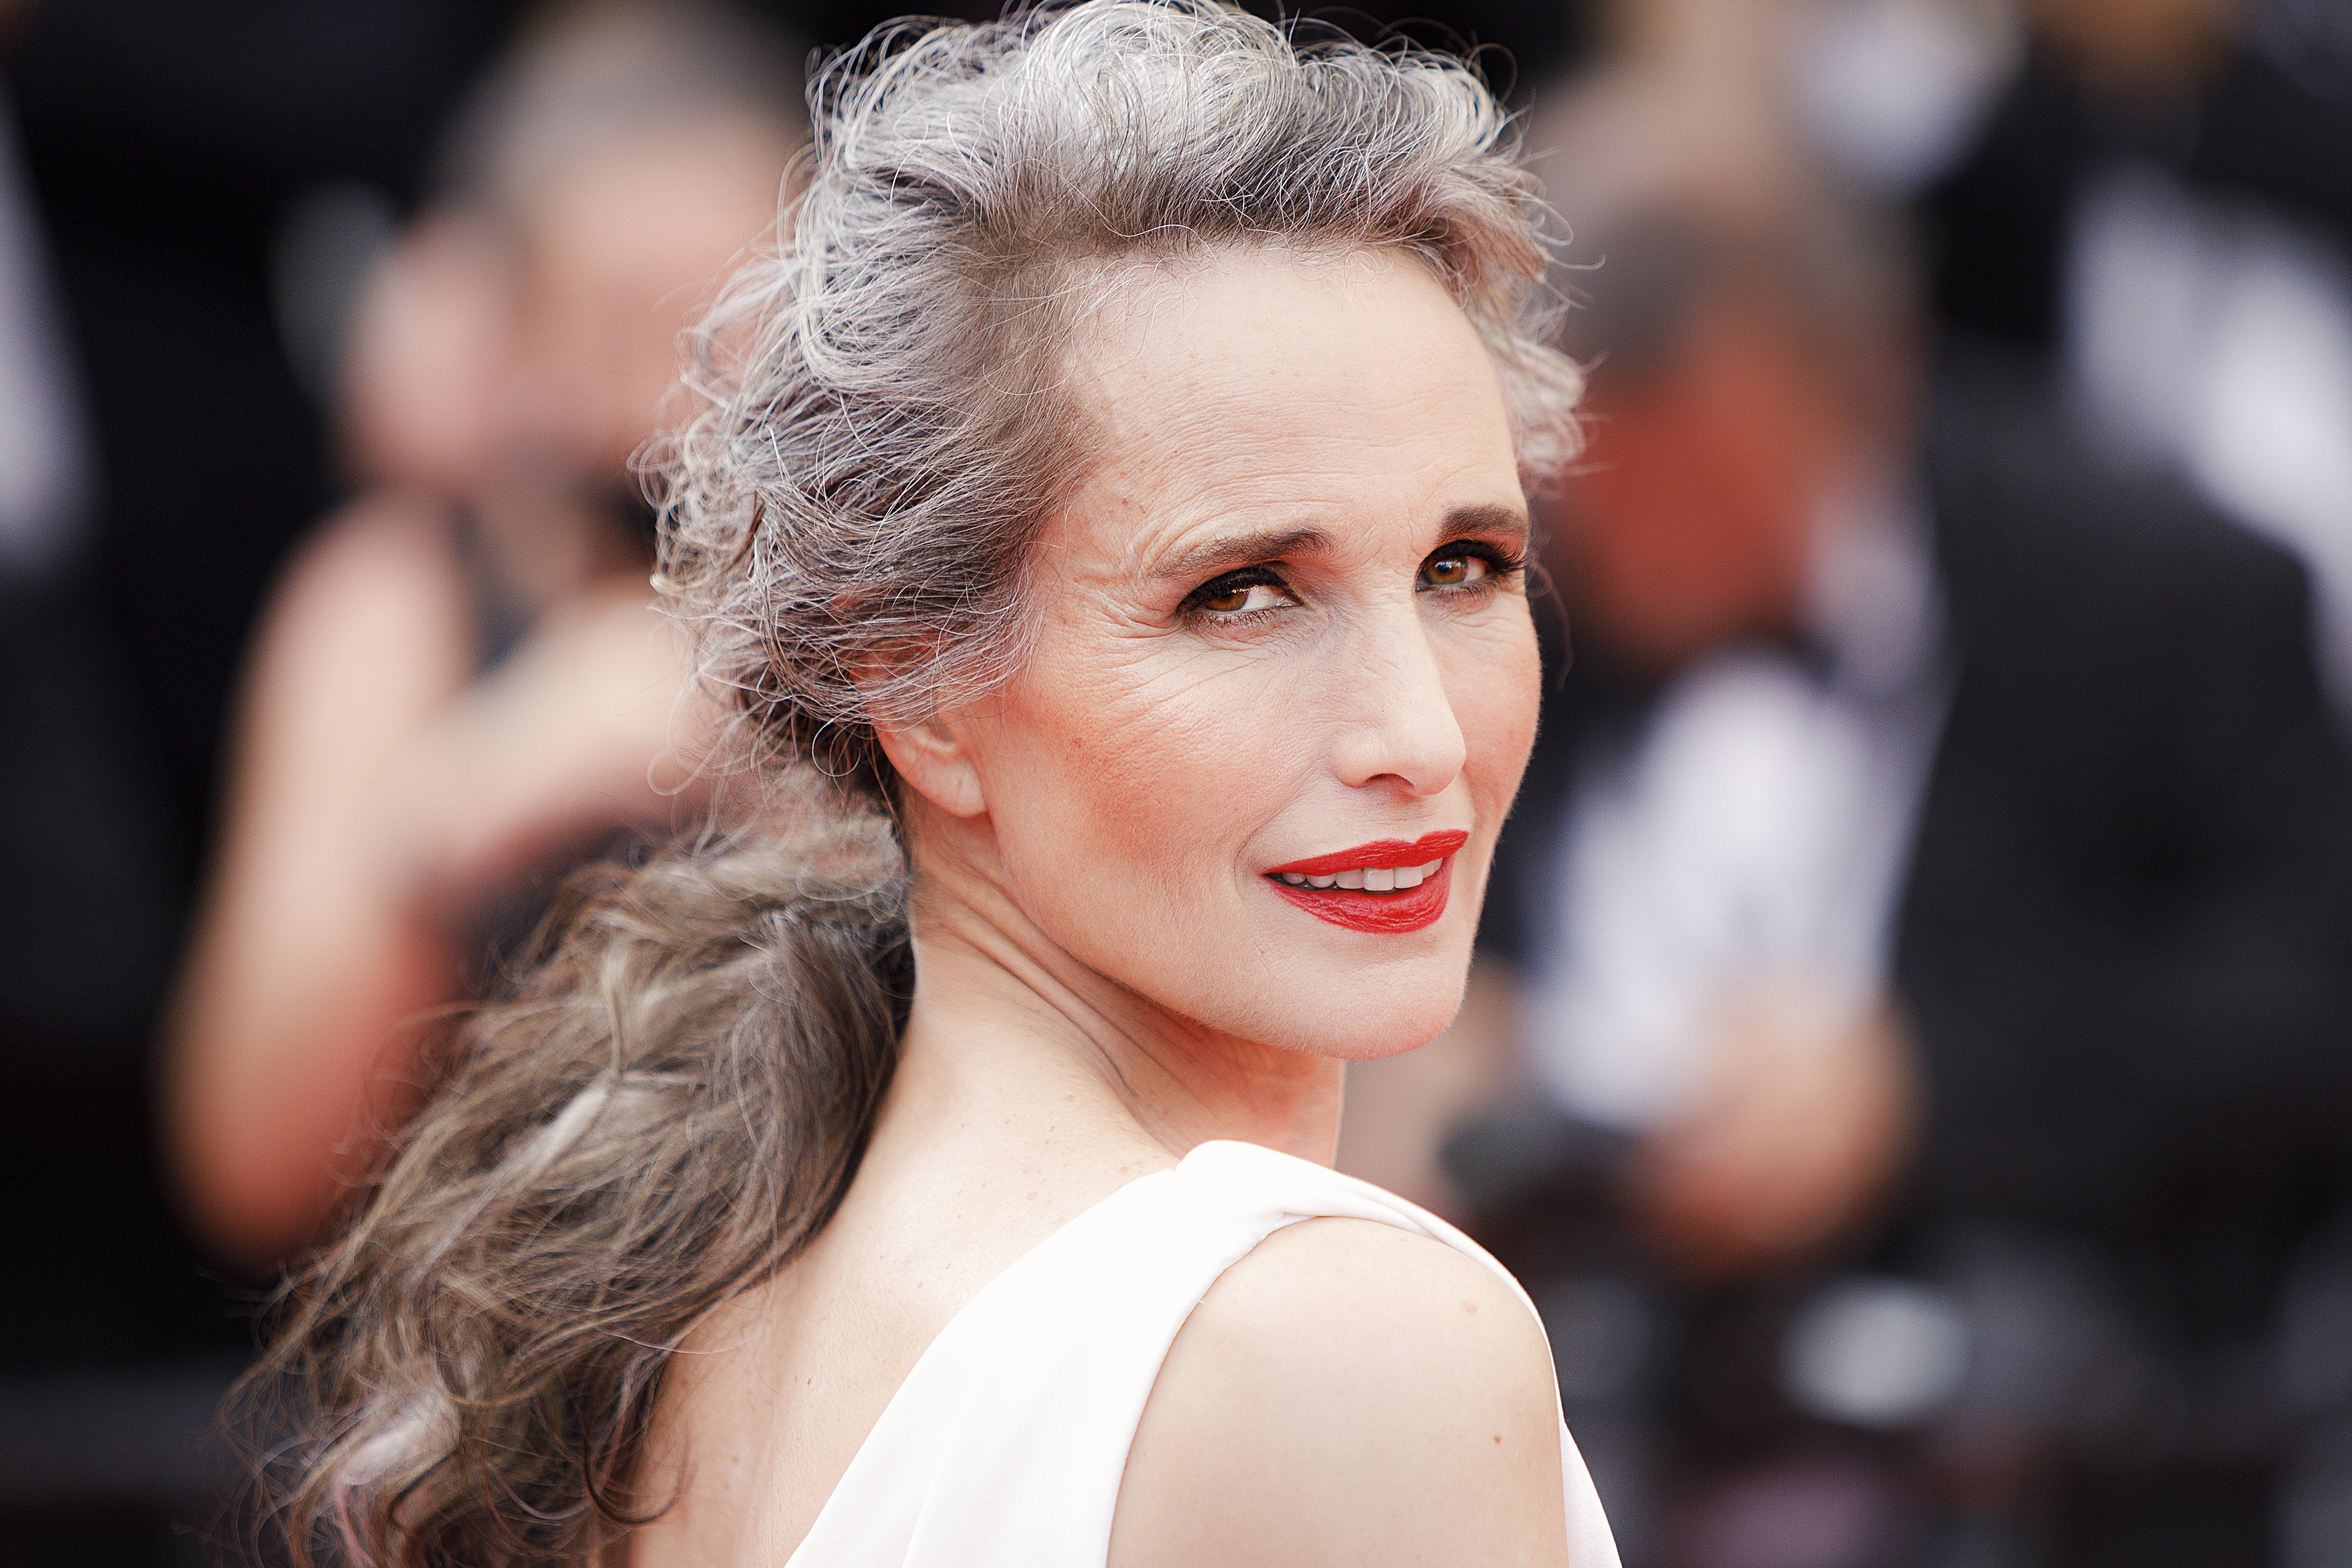 Andie MacDowell at the Cannes Film Festival on July 7, 2021, in Cannes, France | Source: Getty Images